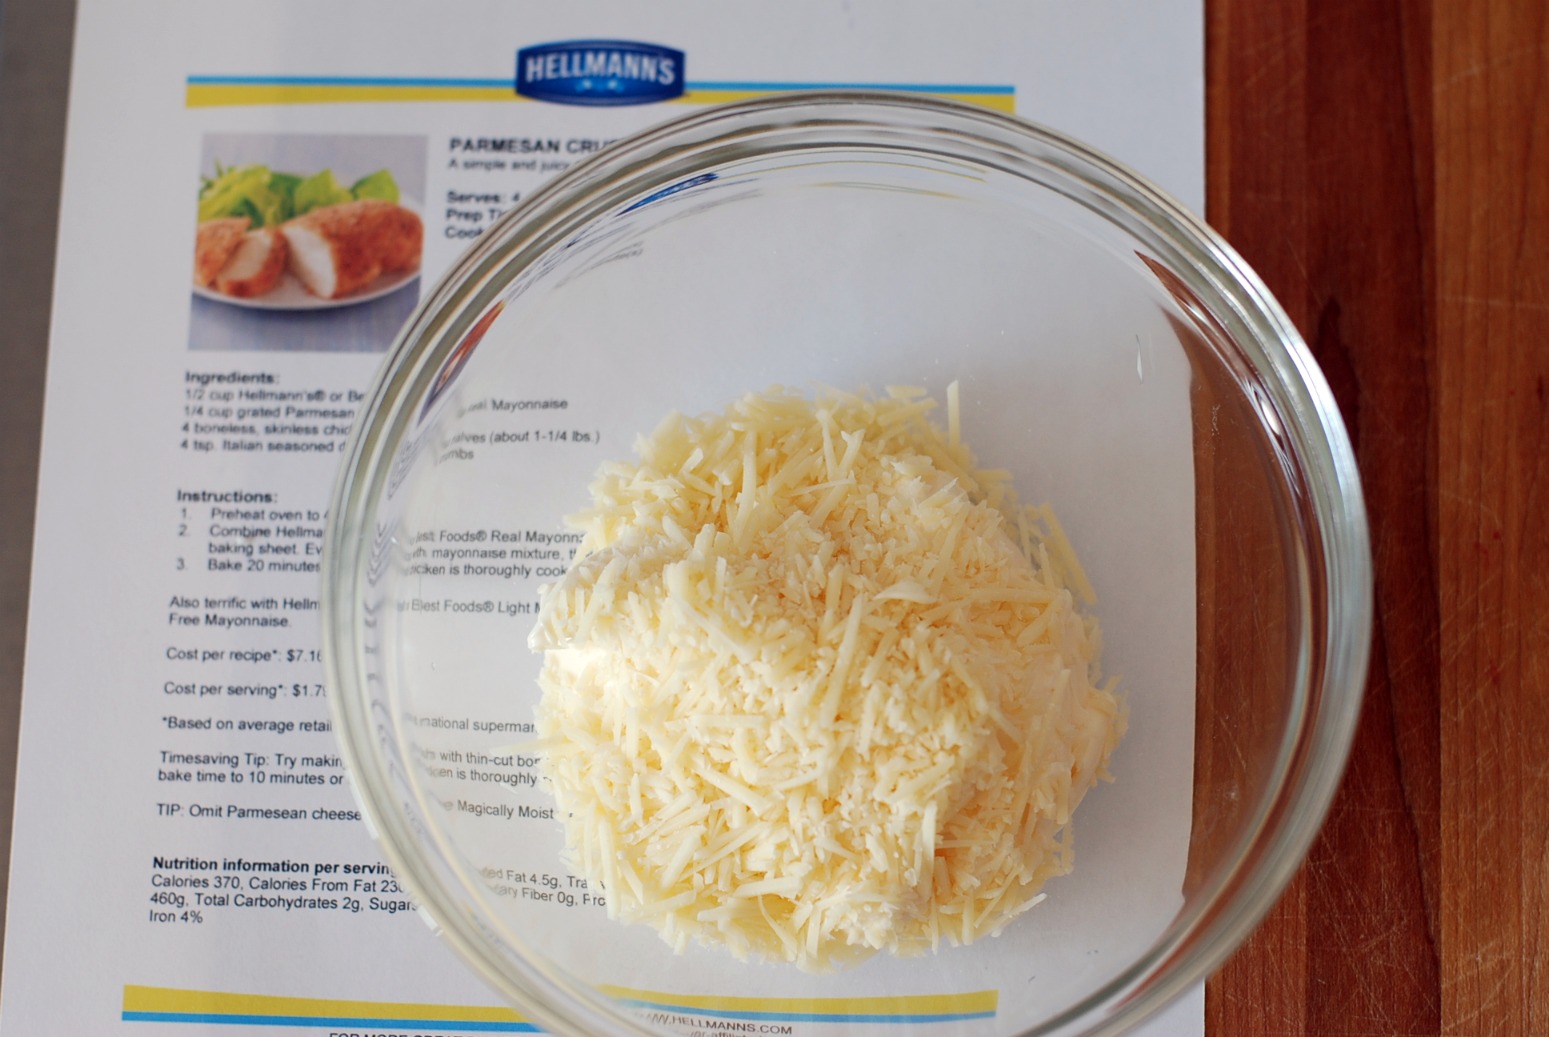 What are some good chicken recipes that use Hellman's mayonaise?